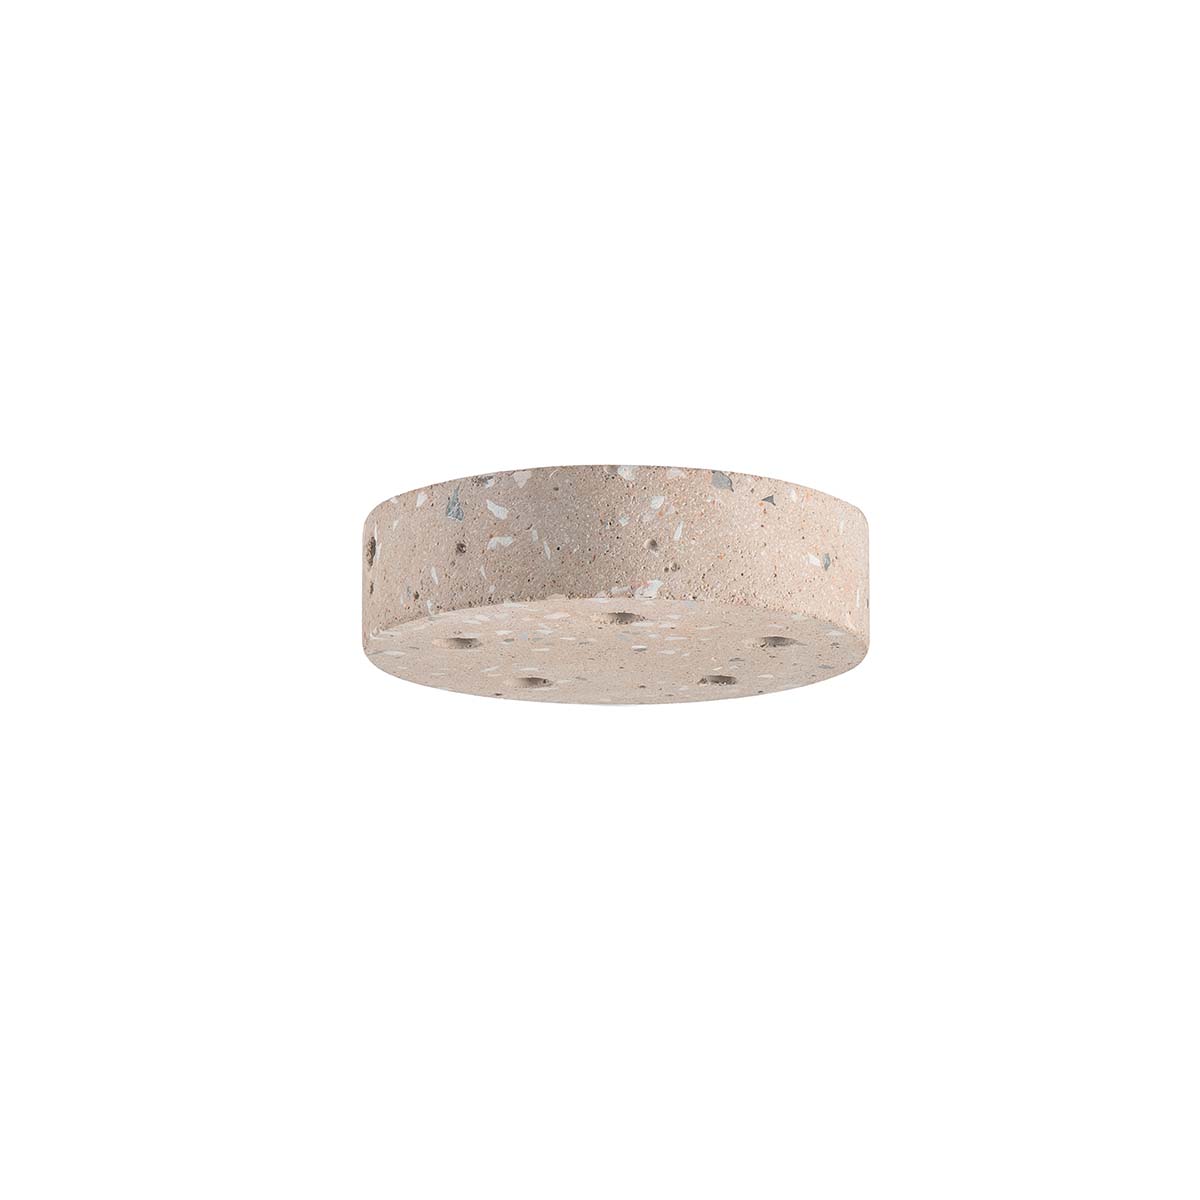 Tangla lighting - TLCP026-05CR - Water stone 5 Lights round canopy stage - concrete